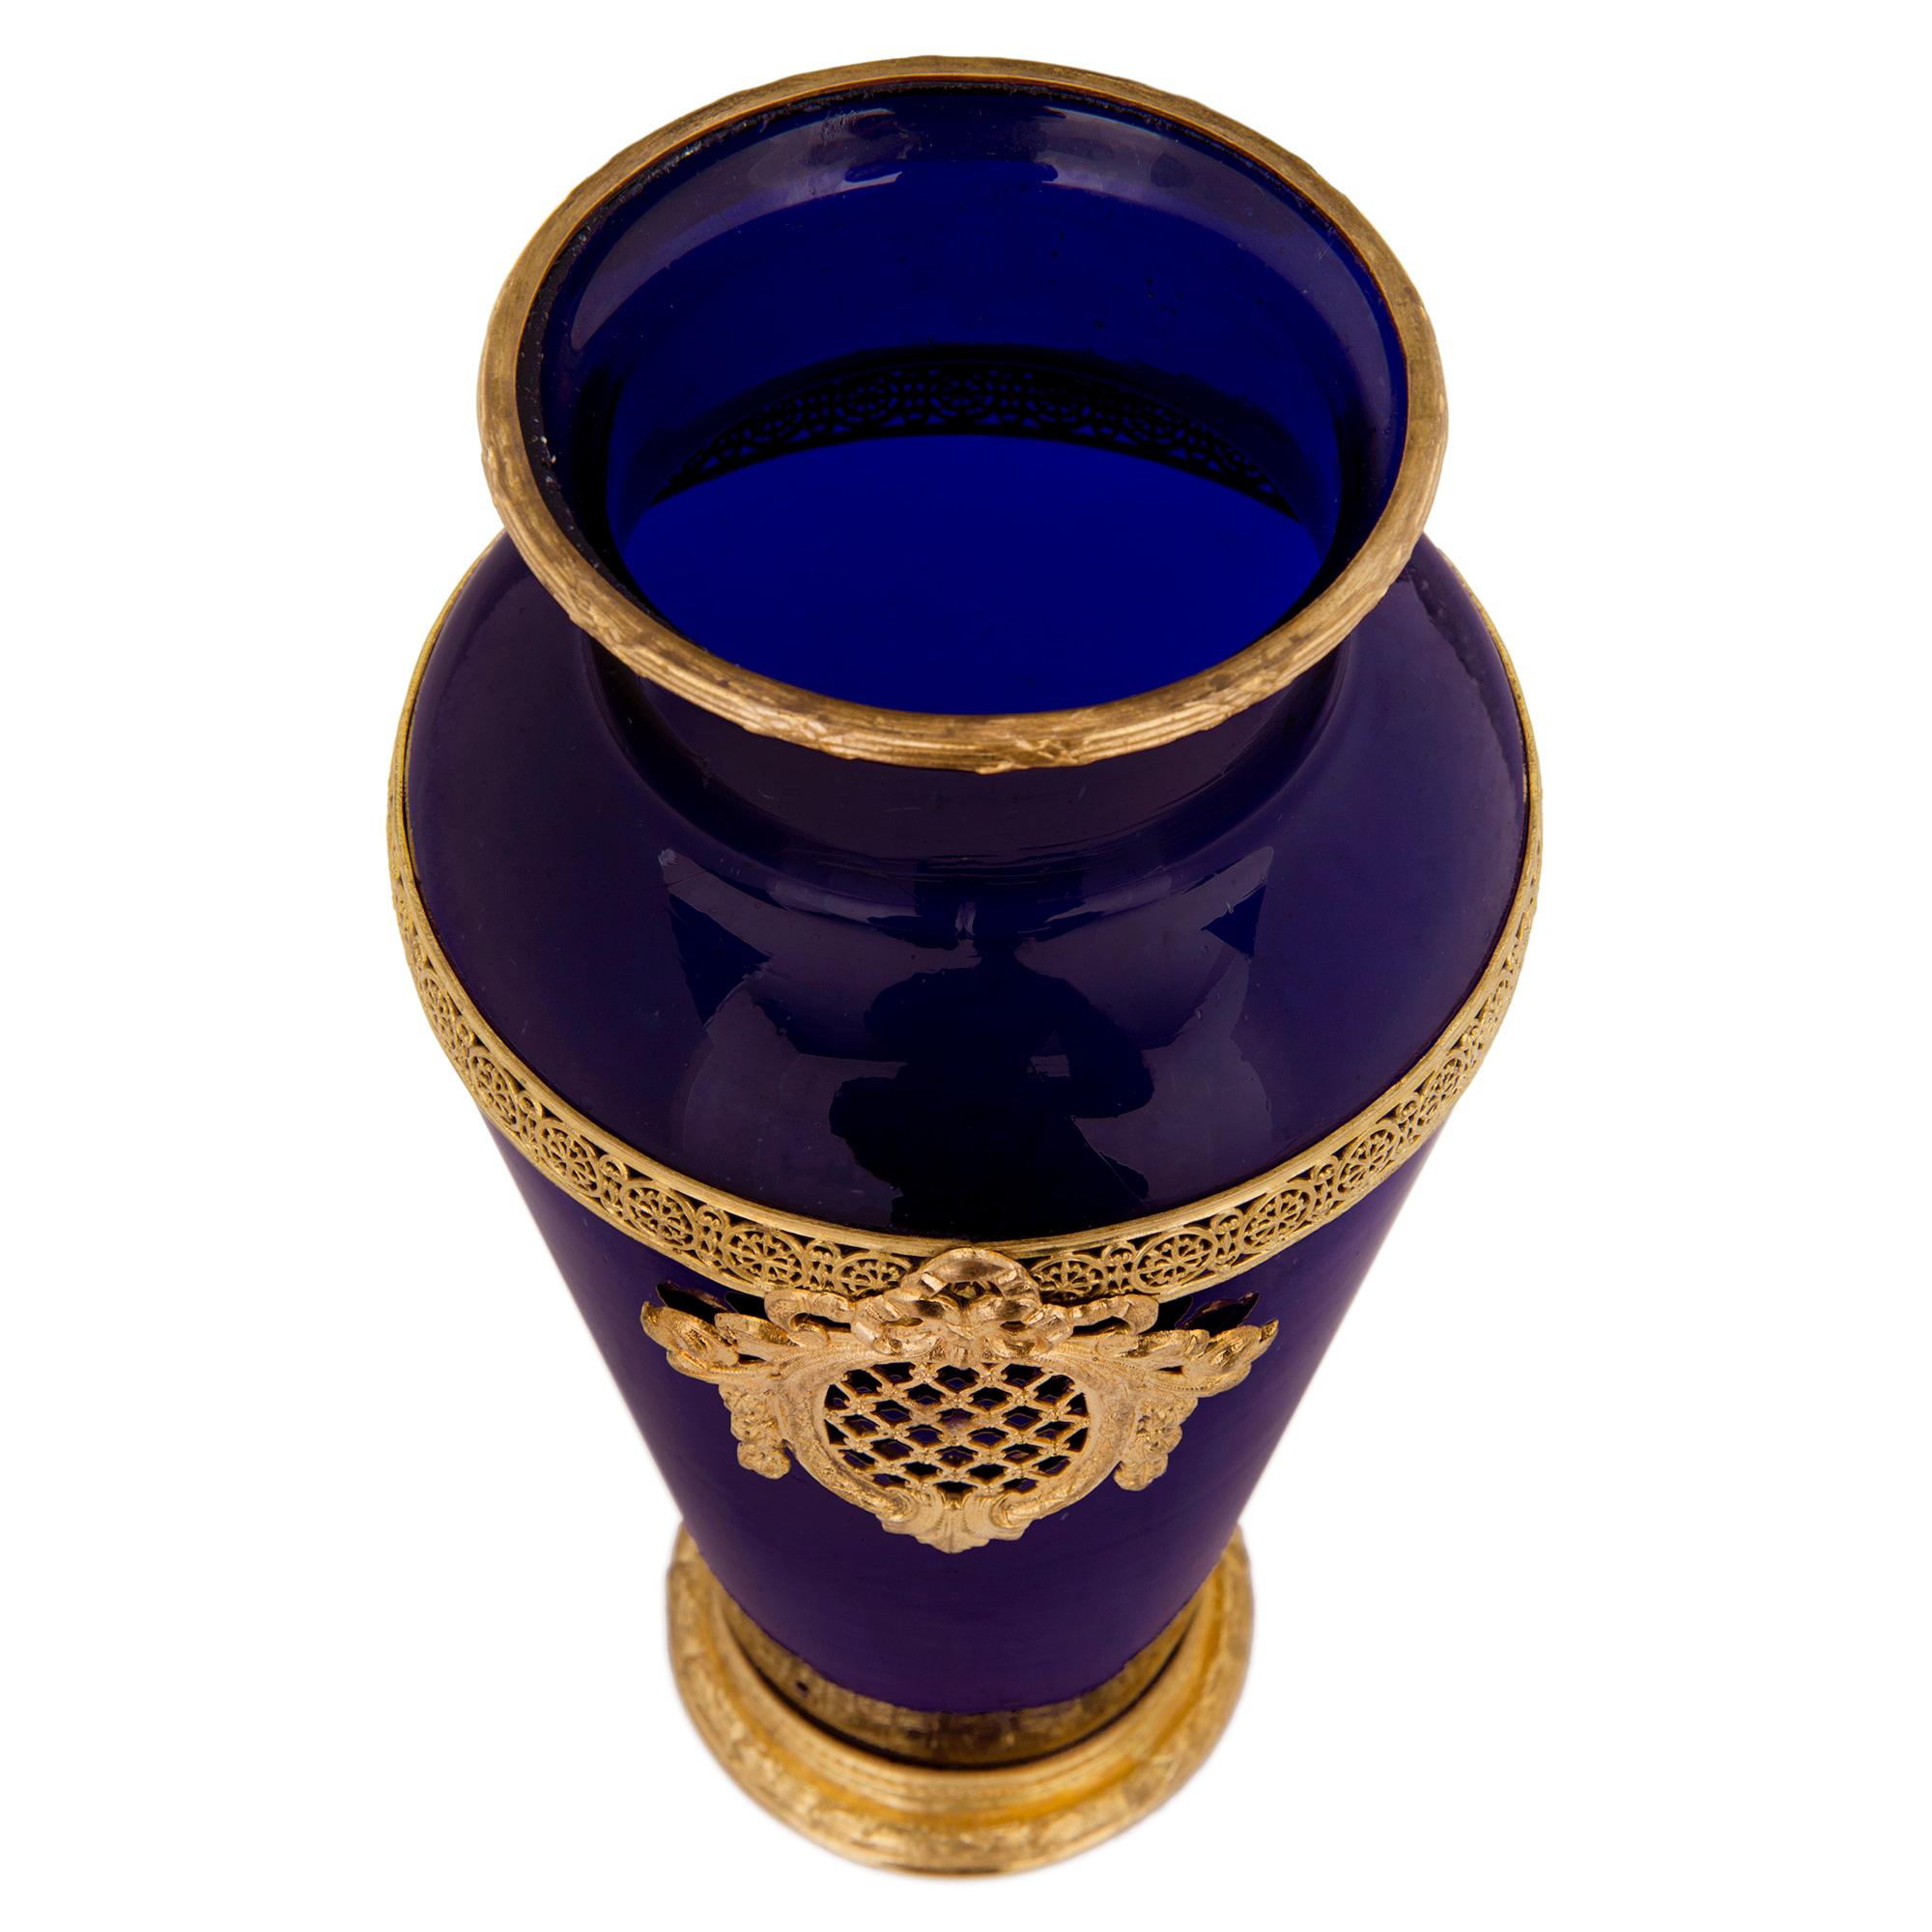 An elegant pair of French 19th century Louis XVI st. ormolu and cobalt blue glass vases. Each vase is raised by a lovely ormolu base with a fine berried laurel band and a lovely interlocking guilloche design. The baluster shaped cobalt blue glass